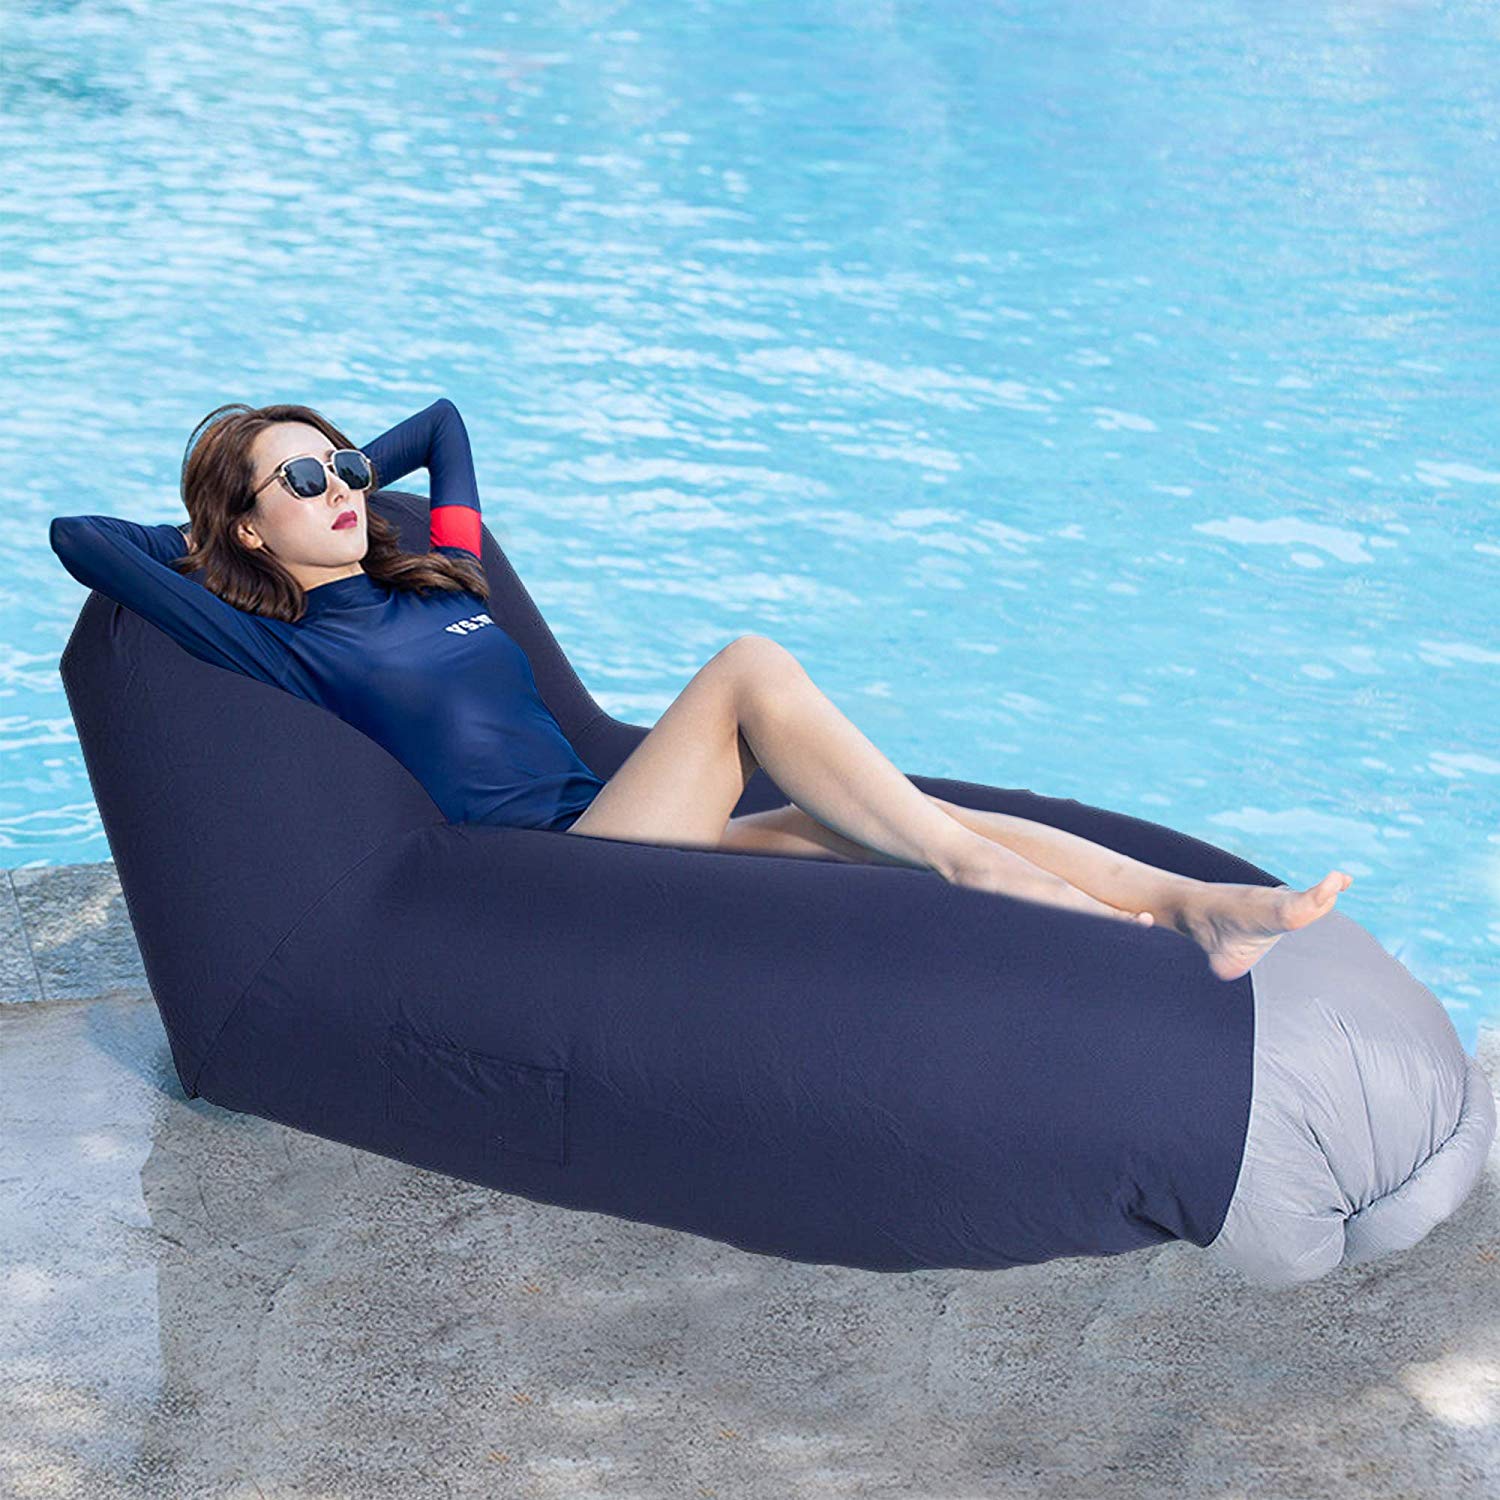 Bosonshop Summer Outdoor Inflatable Lounger Seat Air Mattress Lounge Chair Sofa with Storage Bag